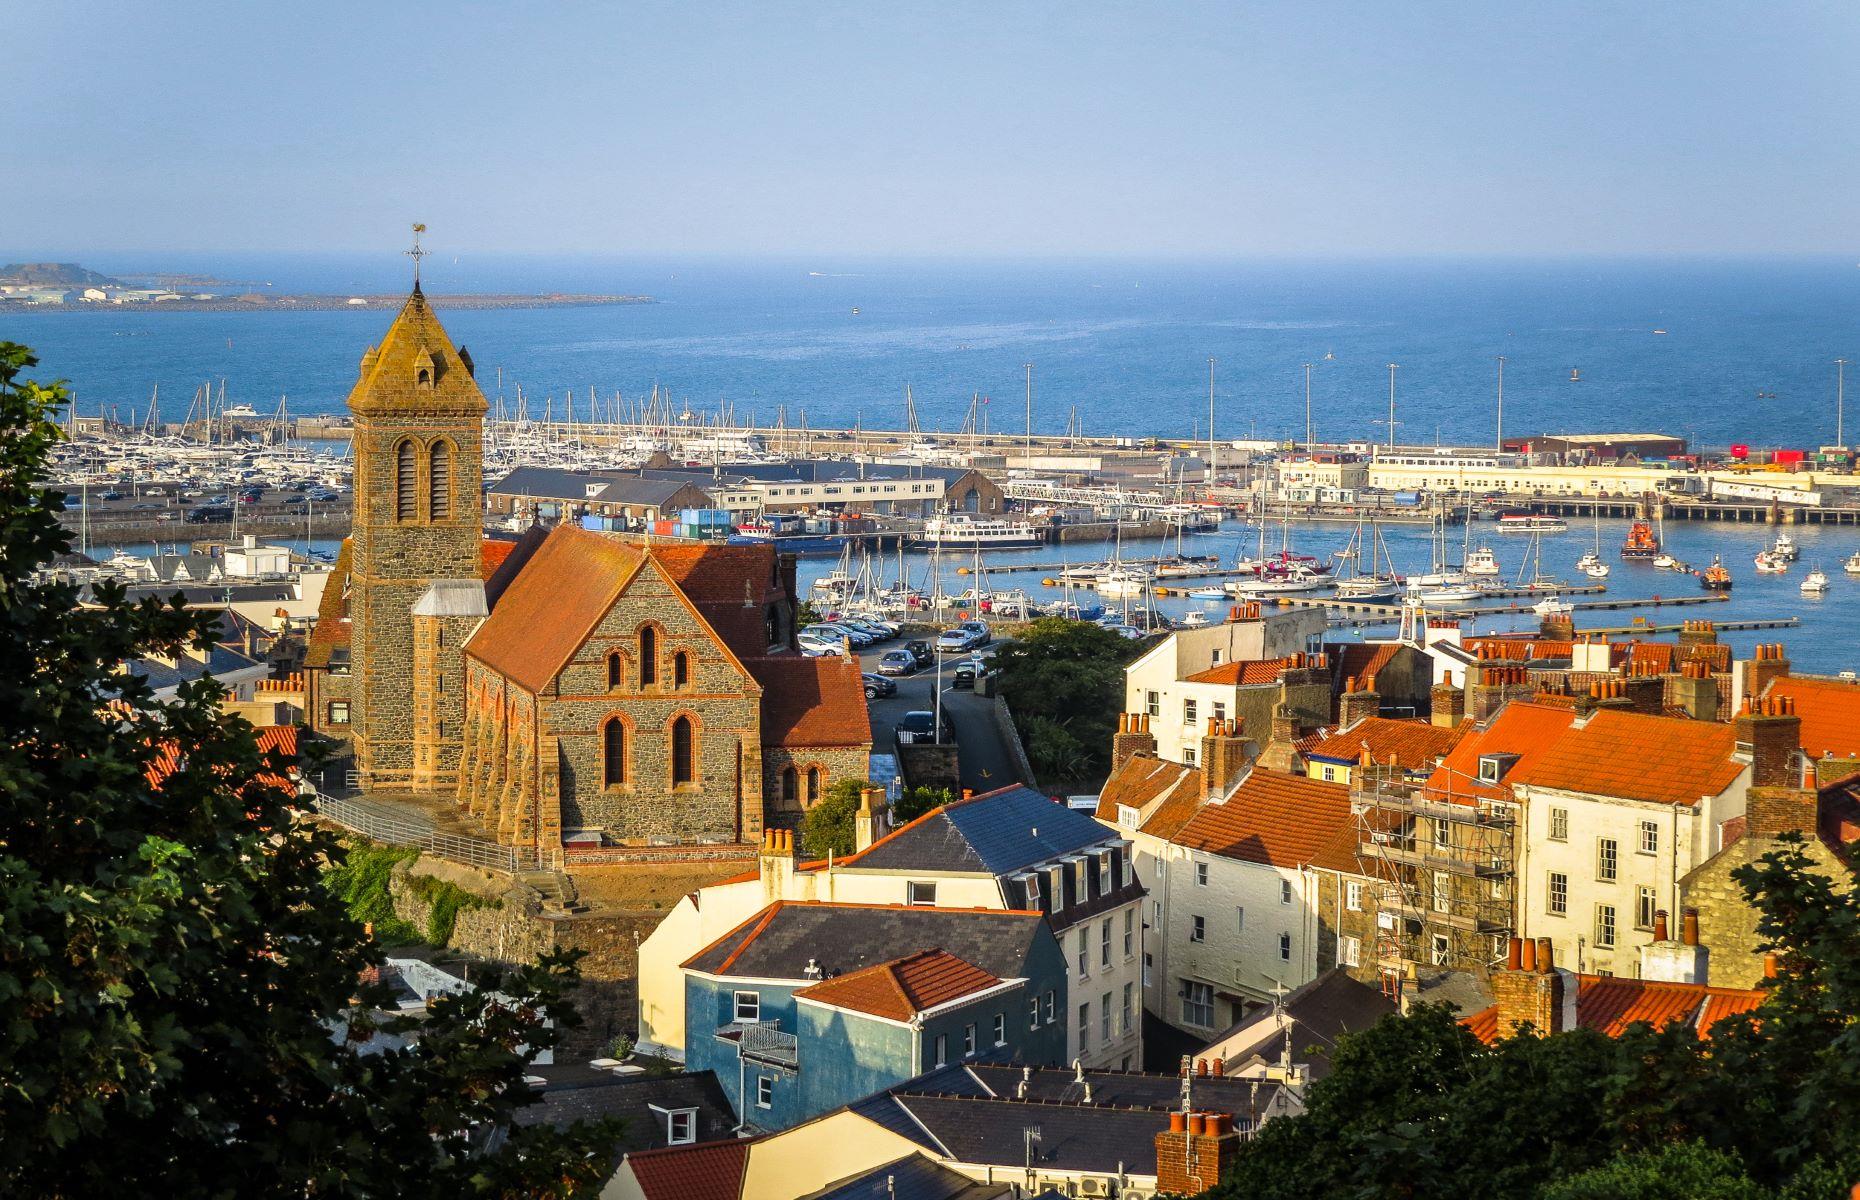 17th most expensive country: Guernsey (67.5)